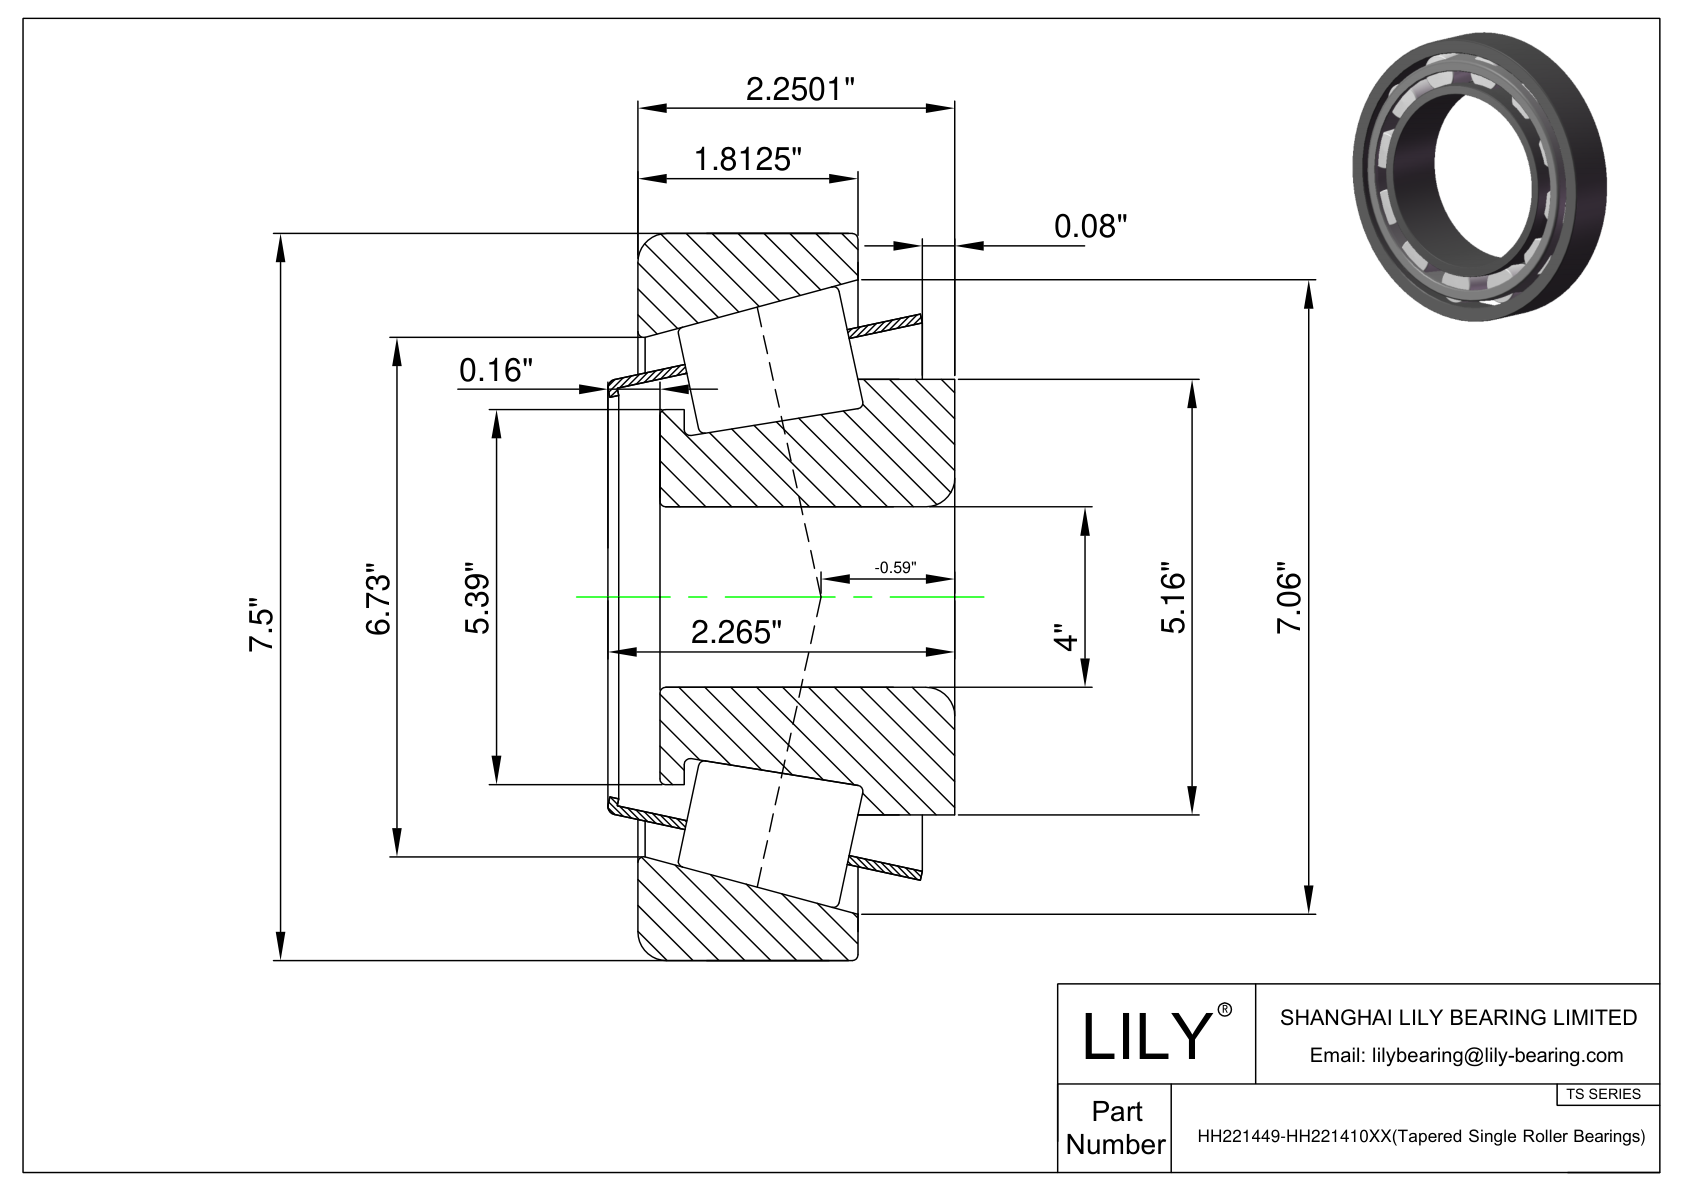 HH221449-HH221410XX TS (Tapered Single Roller Bearings) (Imperial) cad drawing